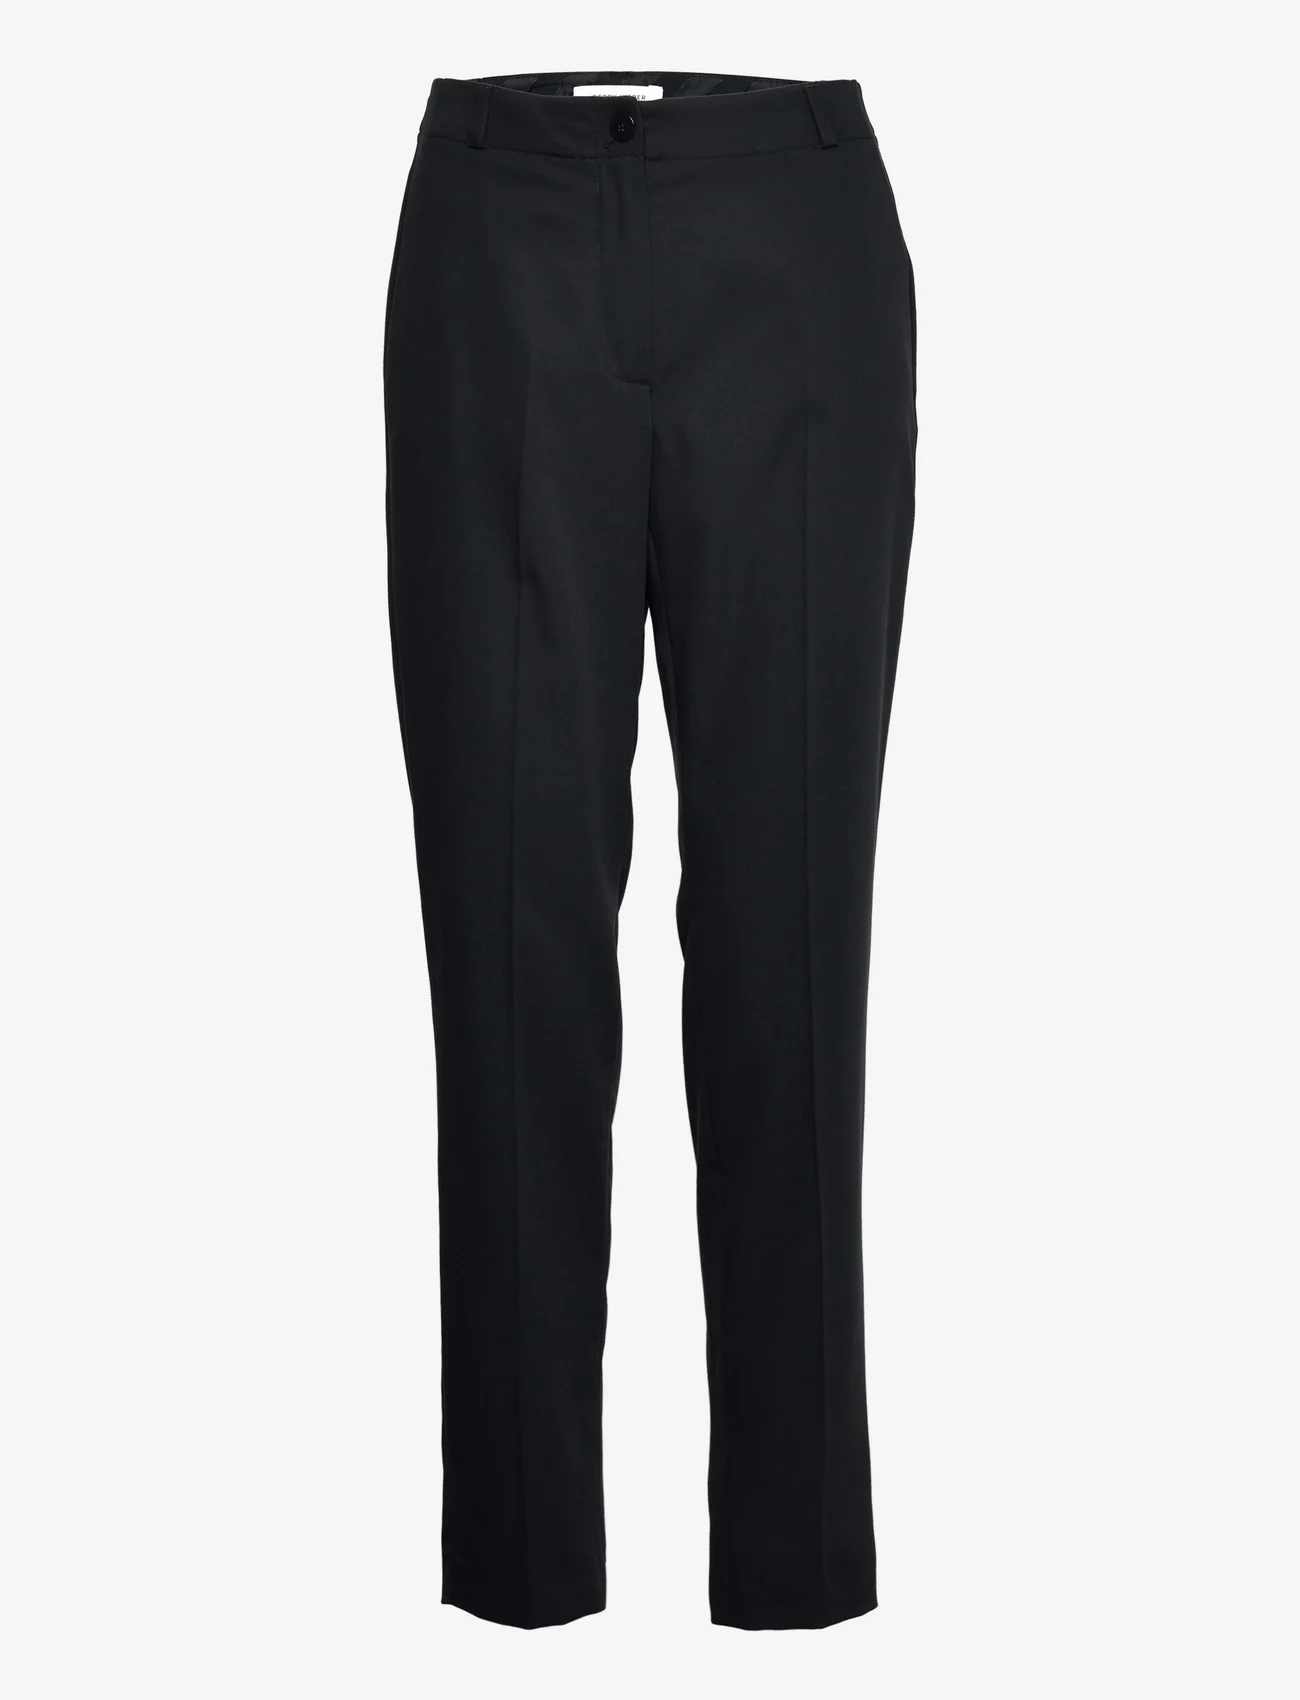 Gerry Weber - PANT CROPPED - formell - dark navy - 0